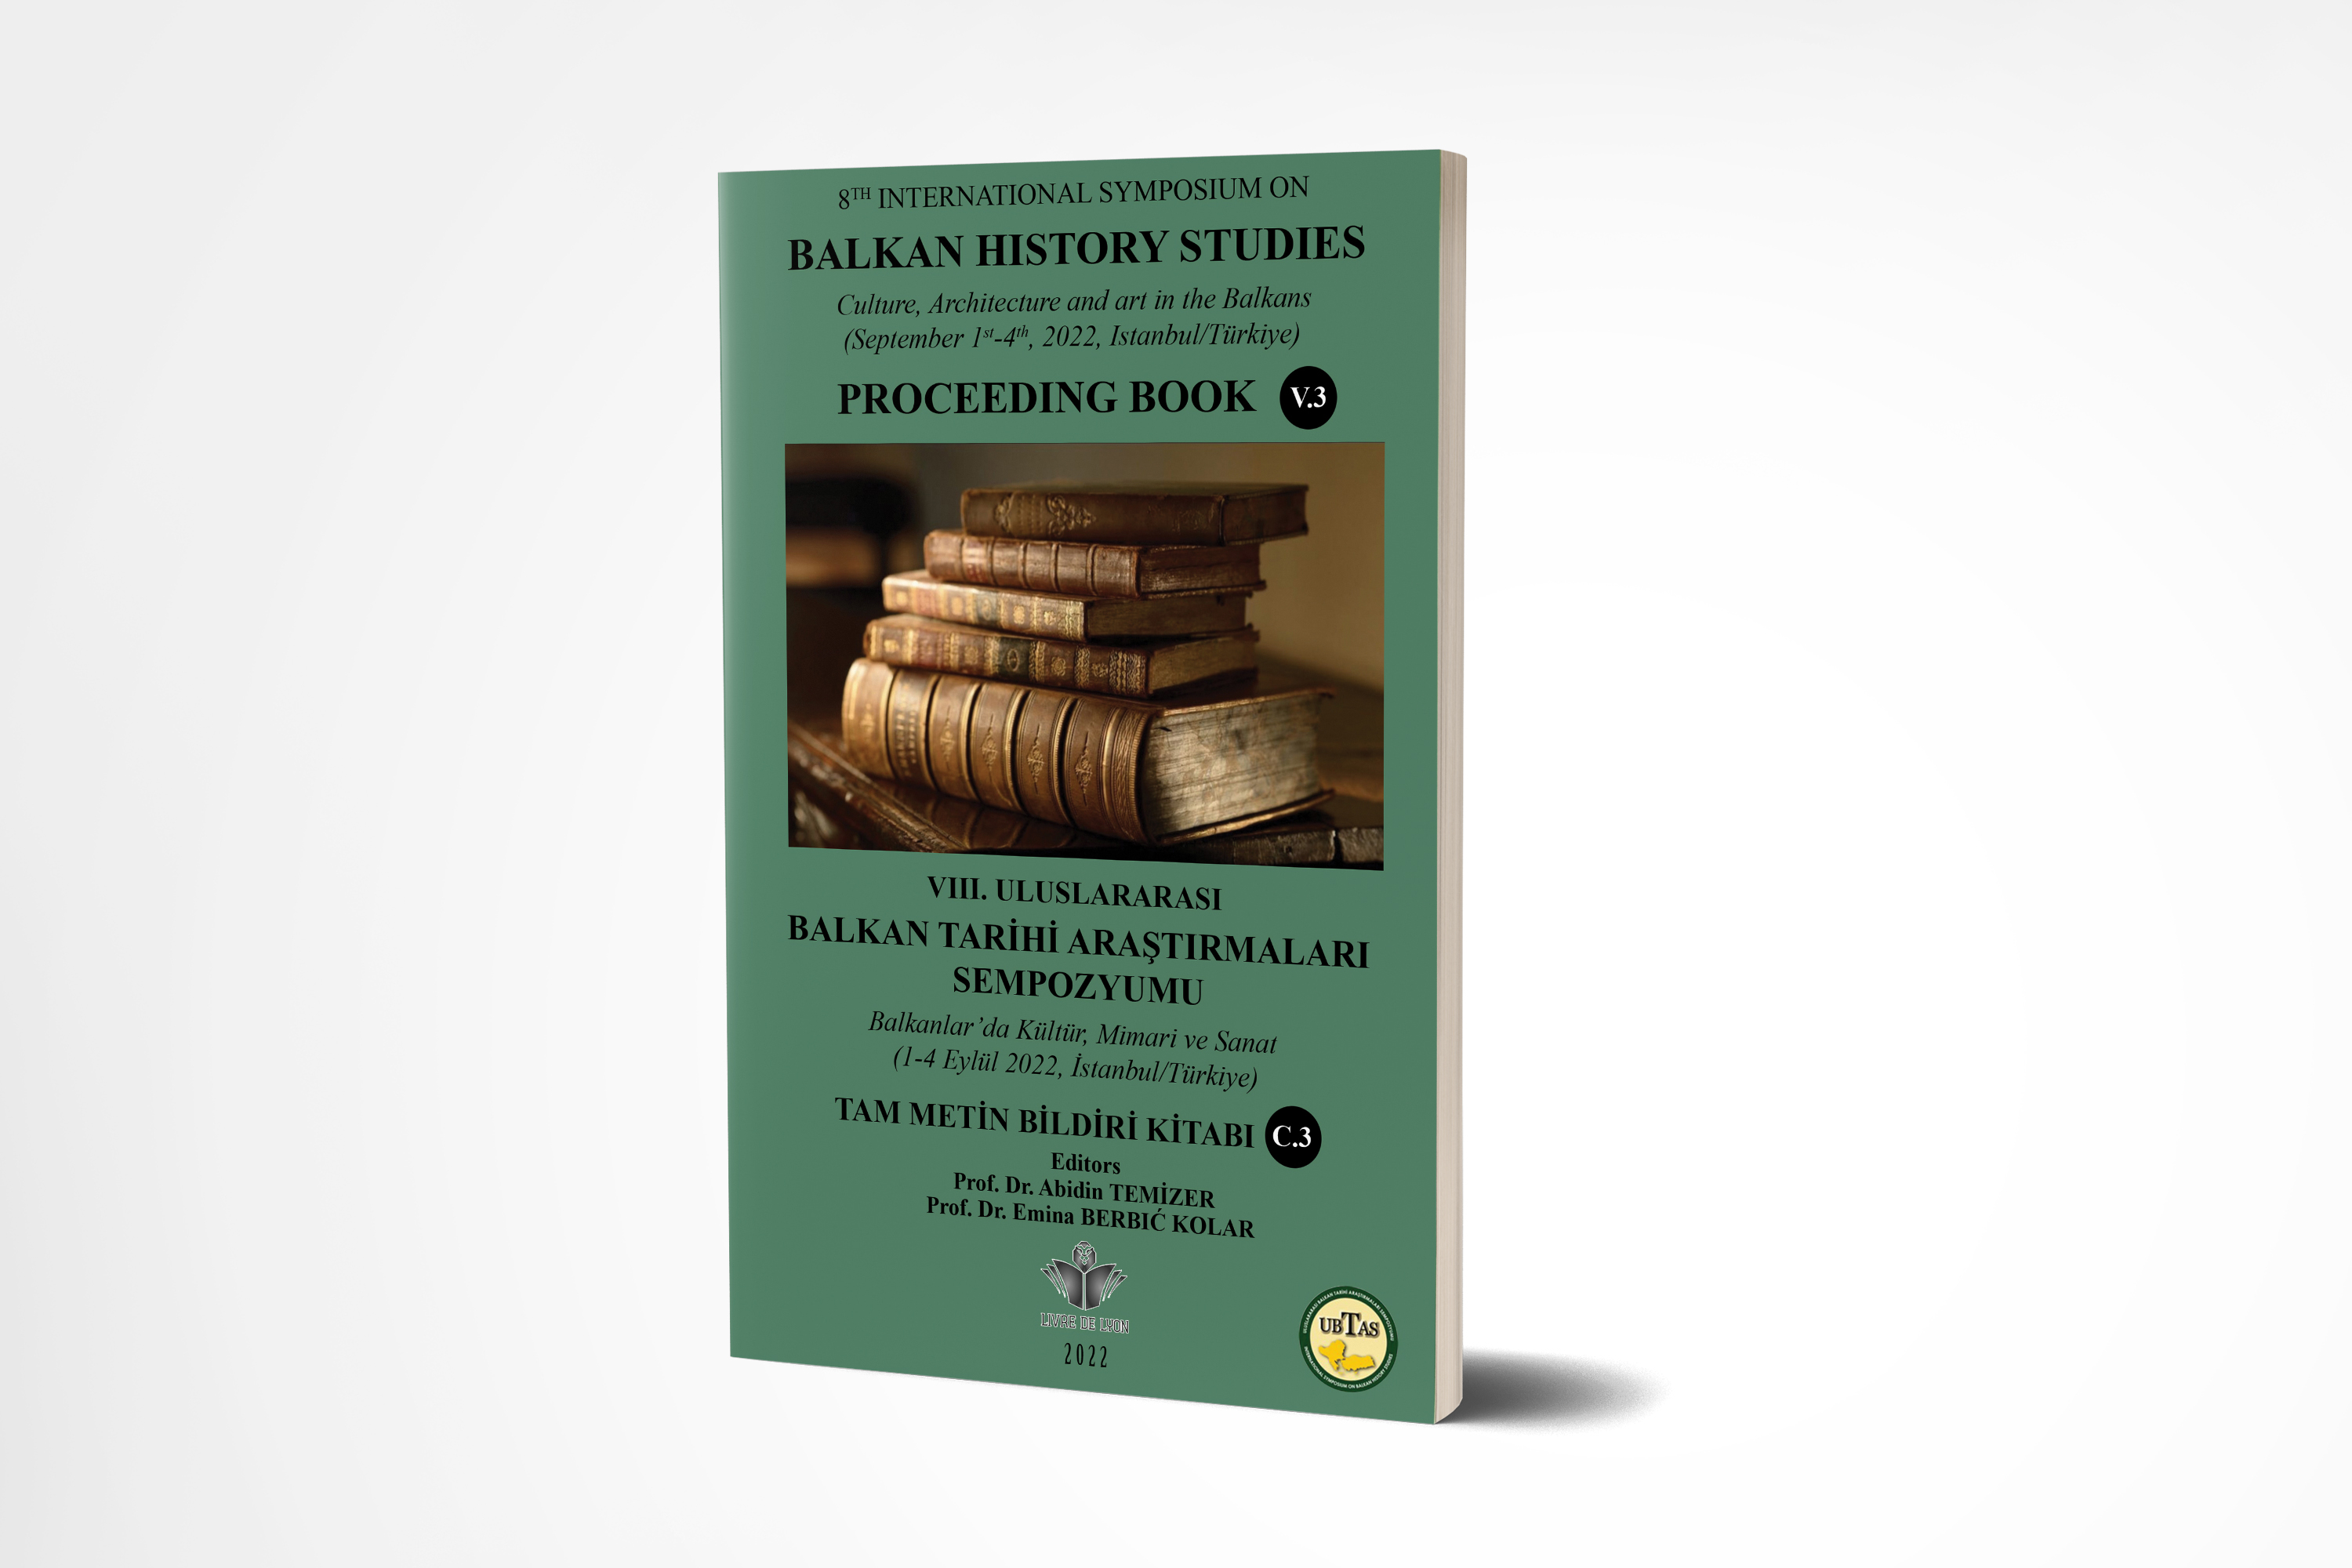 8th International Symposium on Balkan History Studies Culture, Architecture and Art in the Balkans, Proceeding Book, Vol. 3